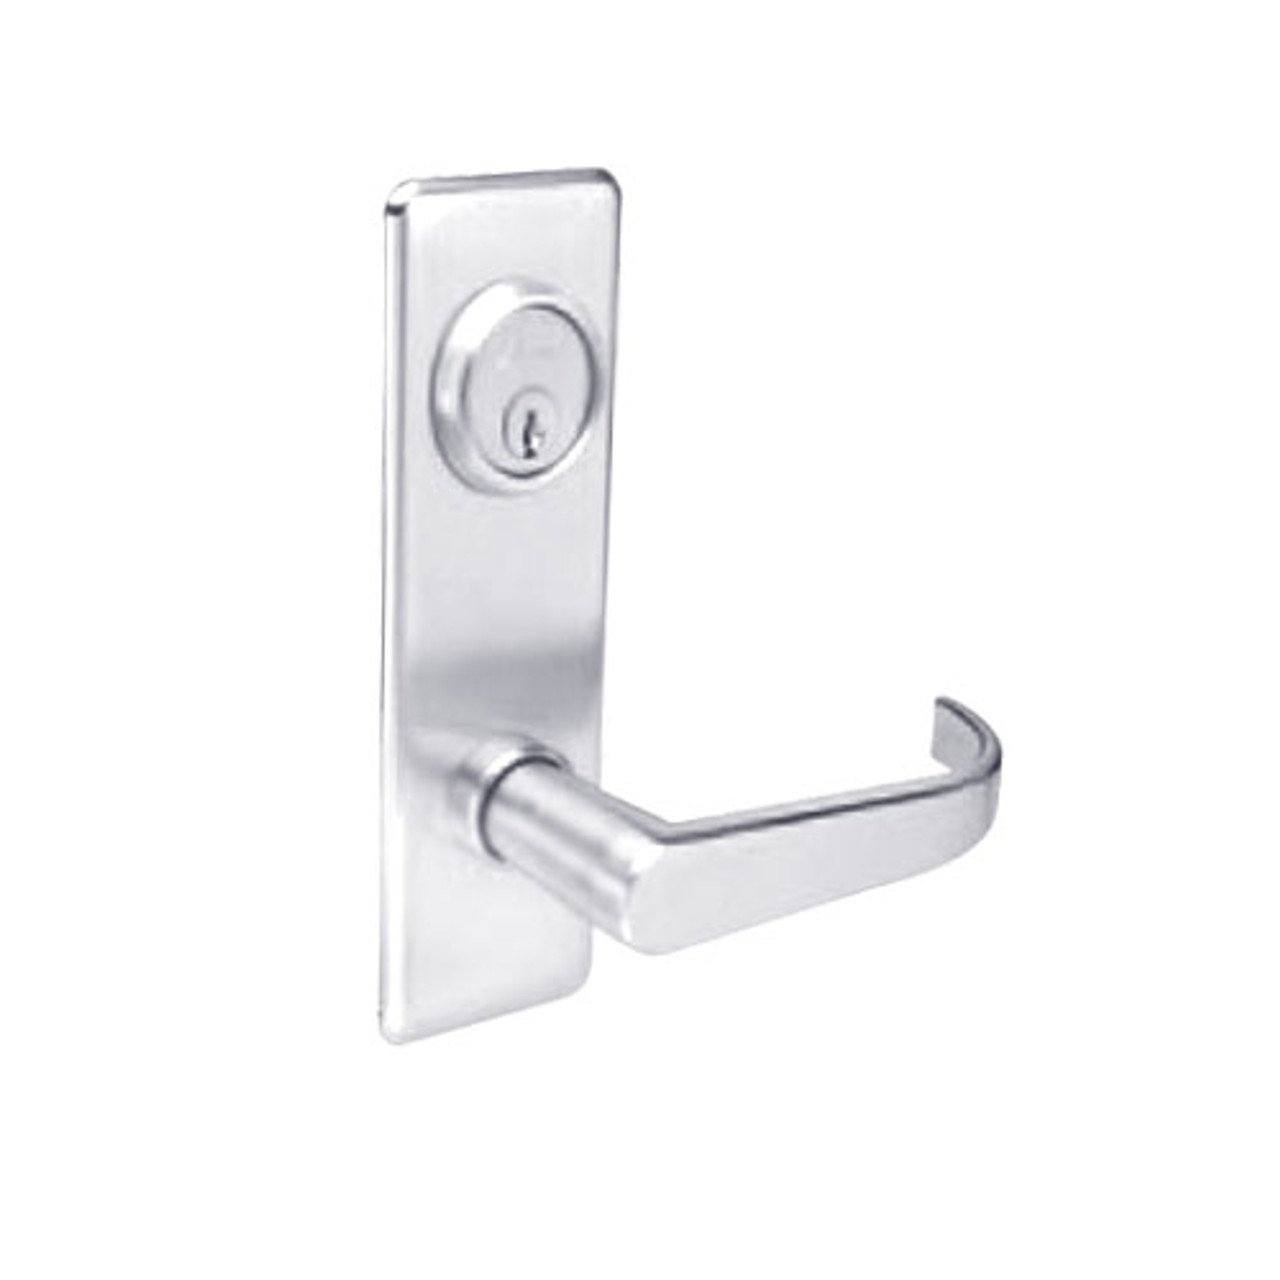 BM20-BRG-26 Arrow Mortise Lock BM Series Entrance Lever with Broadway Design and G Escutcheon in Bright Chrome